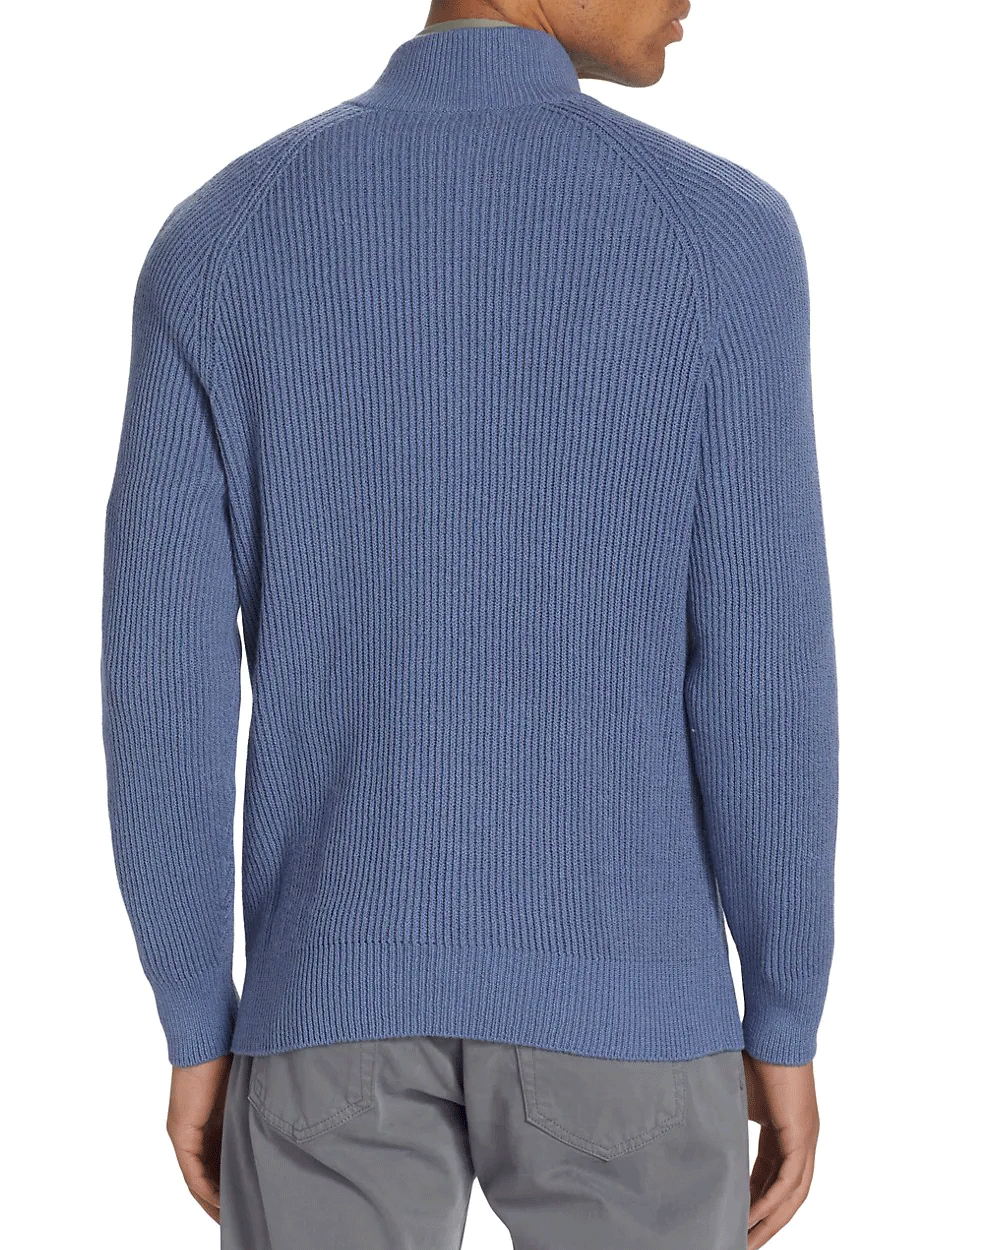 Oxford Blue Ribbed Full Zip Sweater